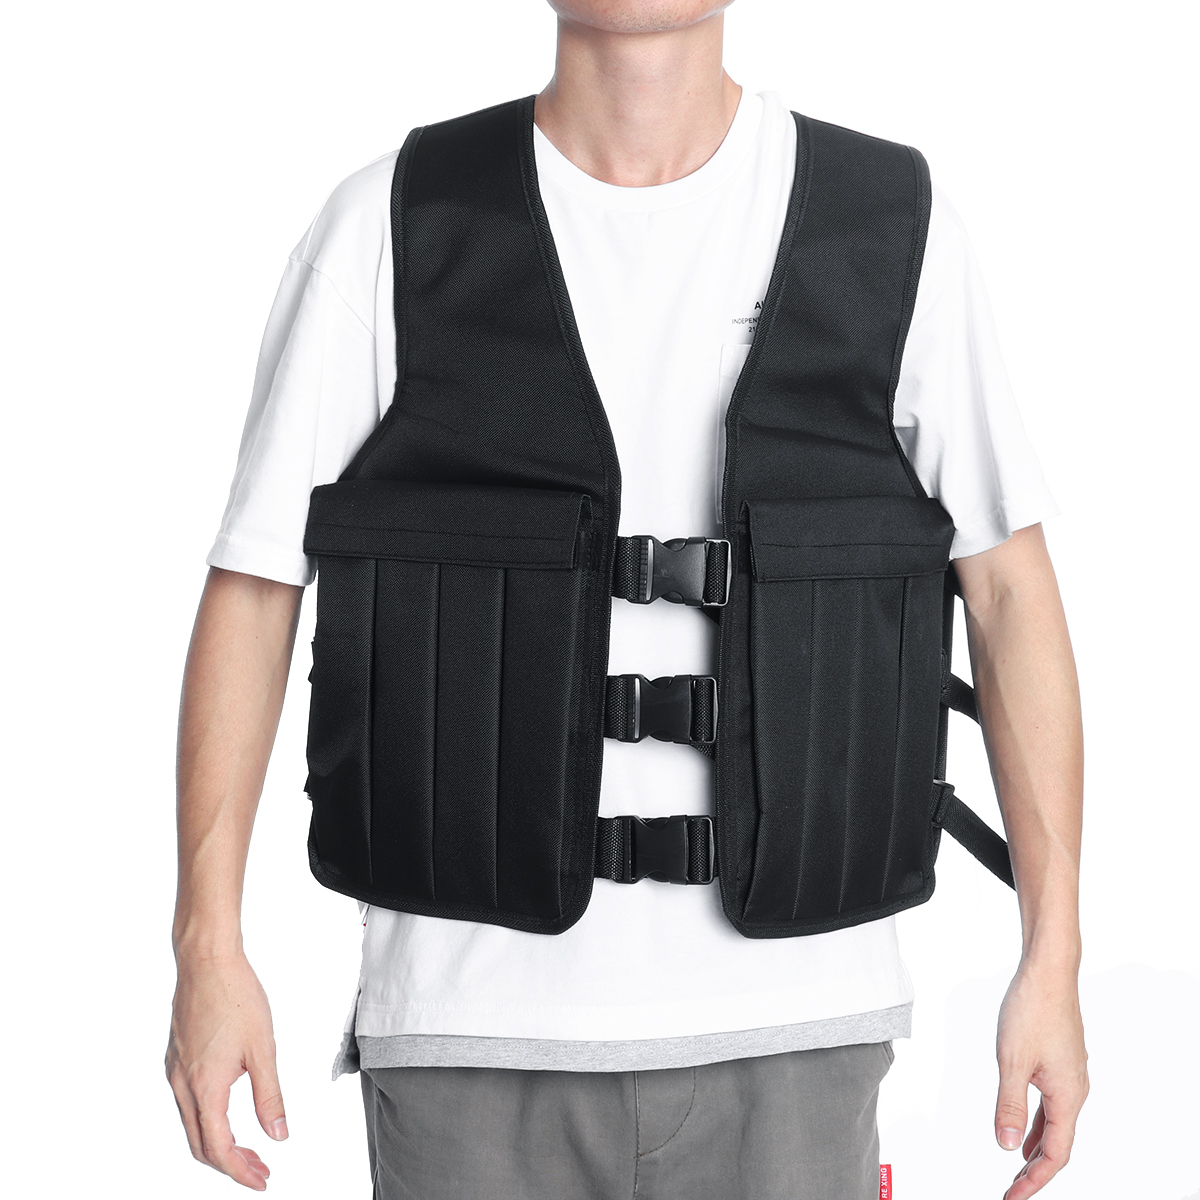 Adjustable-Weight-Vest-Running-Sports-Shaping-Slimming-Fitness-Weight-Bearing-Equipment-1695473-4